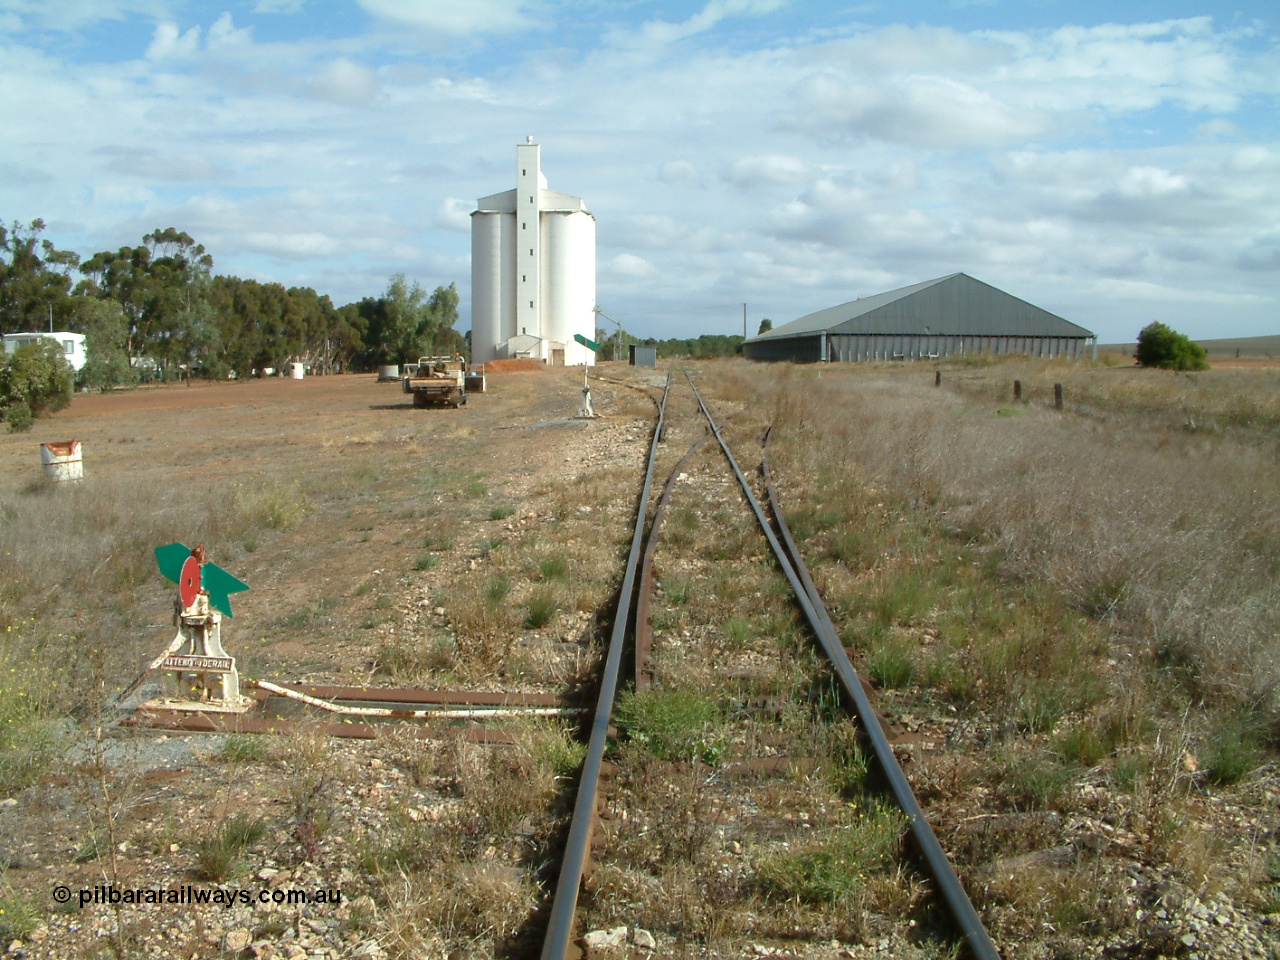 030409 145828
Ungarra, located at the 108.1 km and opened in March 1913 as the temporary terminus till July 1913. Yard overview looking south from the north end, loading ramp can be made out in front of car, silo complex, station hut then the horizontal grain bunker on the right.
